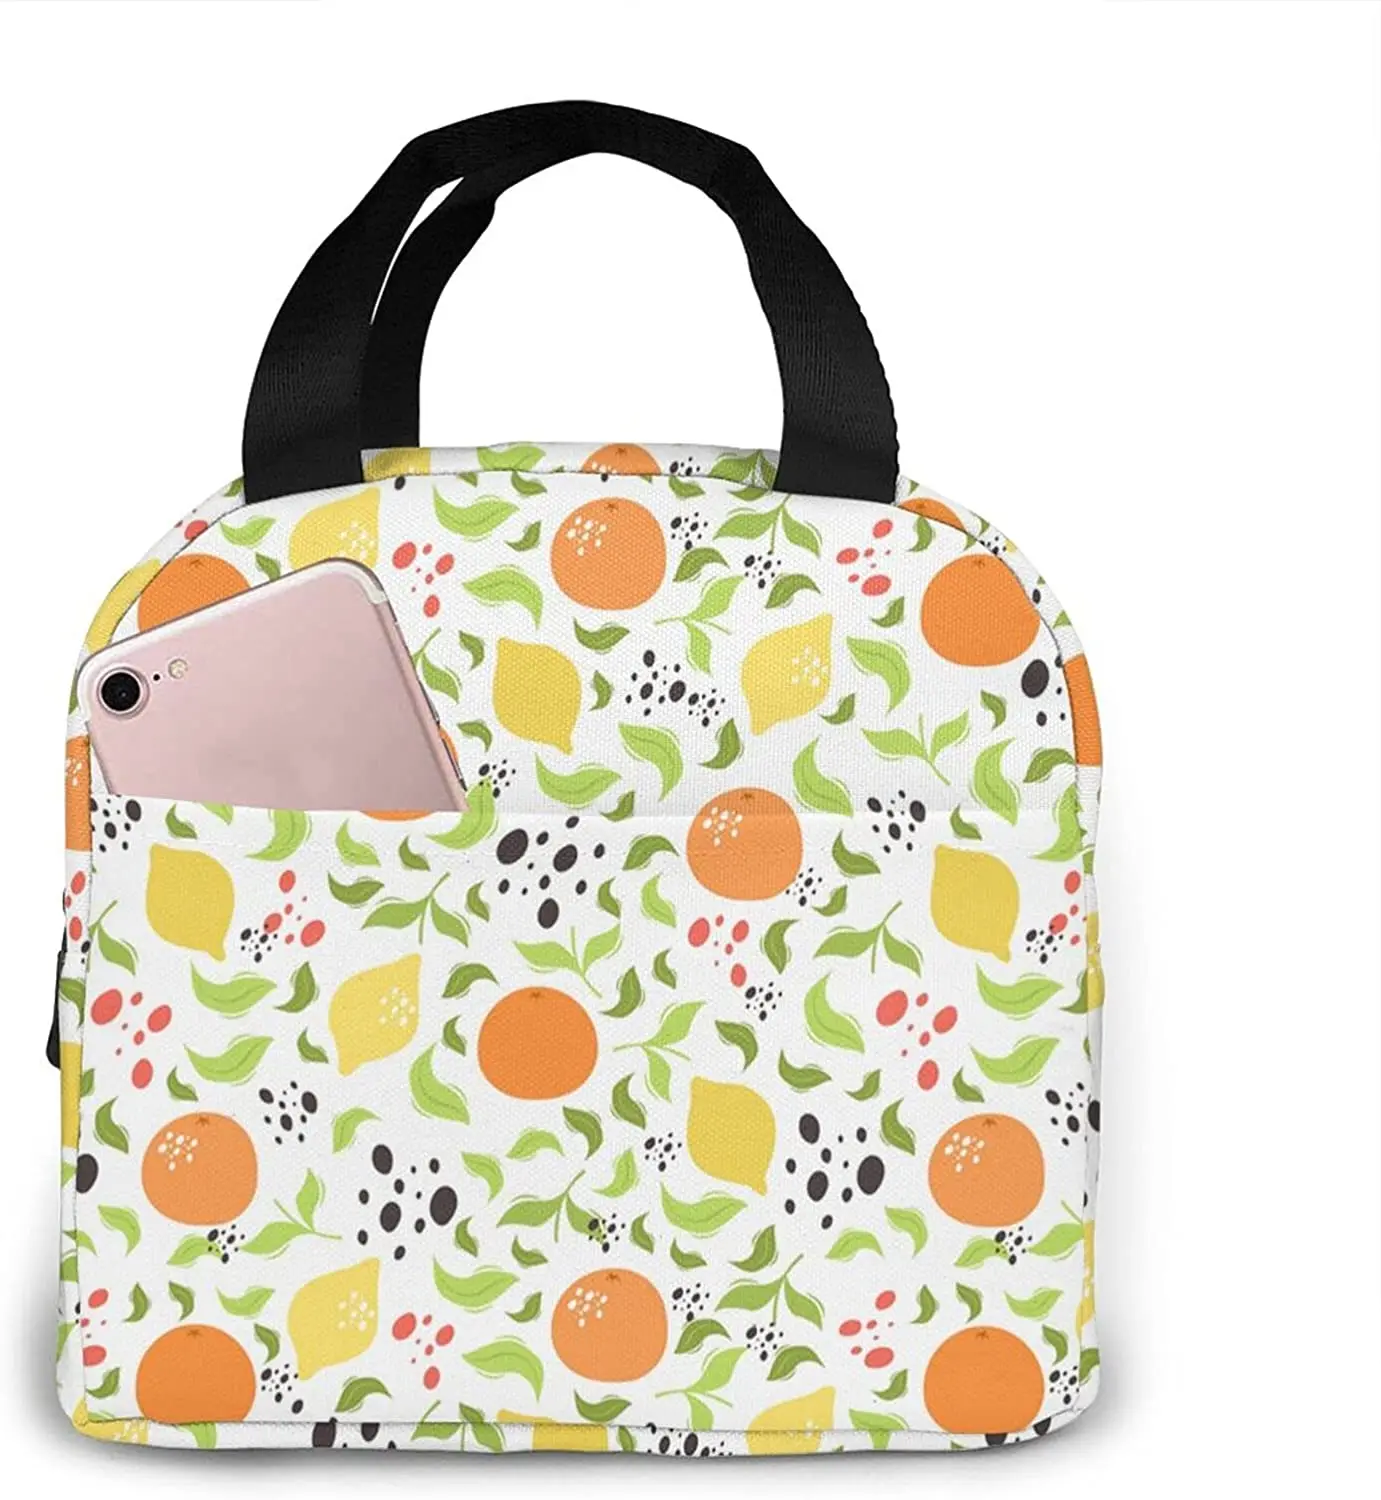 

Lemon Fruit Thermal Lunch Bag for Women Kids Insulated Tote Large Cooler Bento Box Container for Beach Picnic Work Travel School